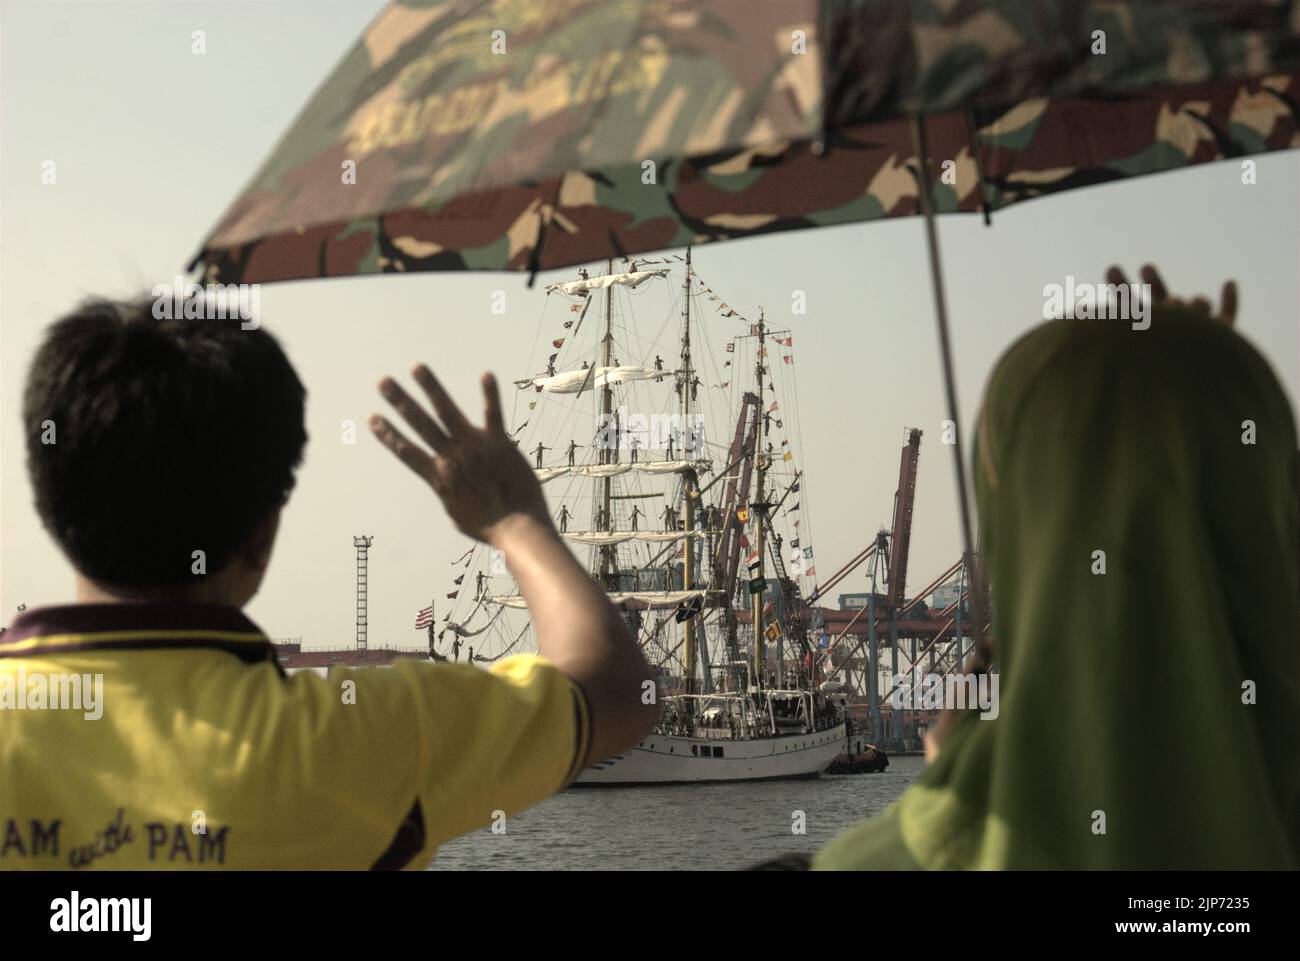 Families and visitors waving goodbye to KRI Dewaruci (Dewa Ruci), an Indonesian tall ship, as the barquentine type schooner starting to sail after being opened for public at Kolinlamil harbour (Navy harbour) in Tanjung Priok, North Jakarta, Jakarta, Indonesia. Stock Photo